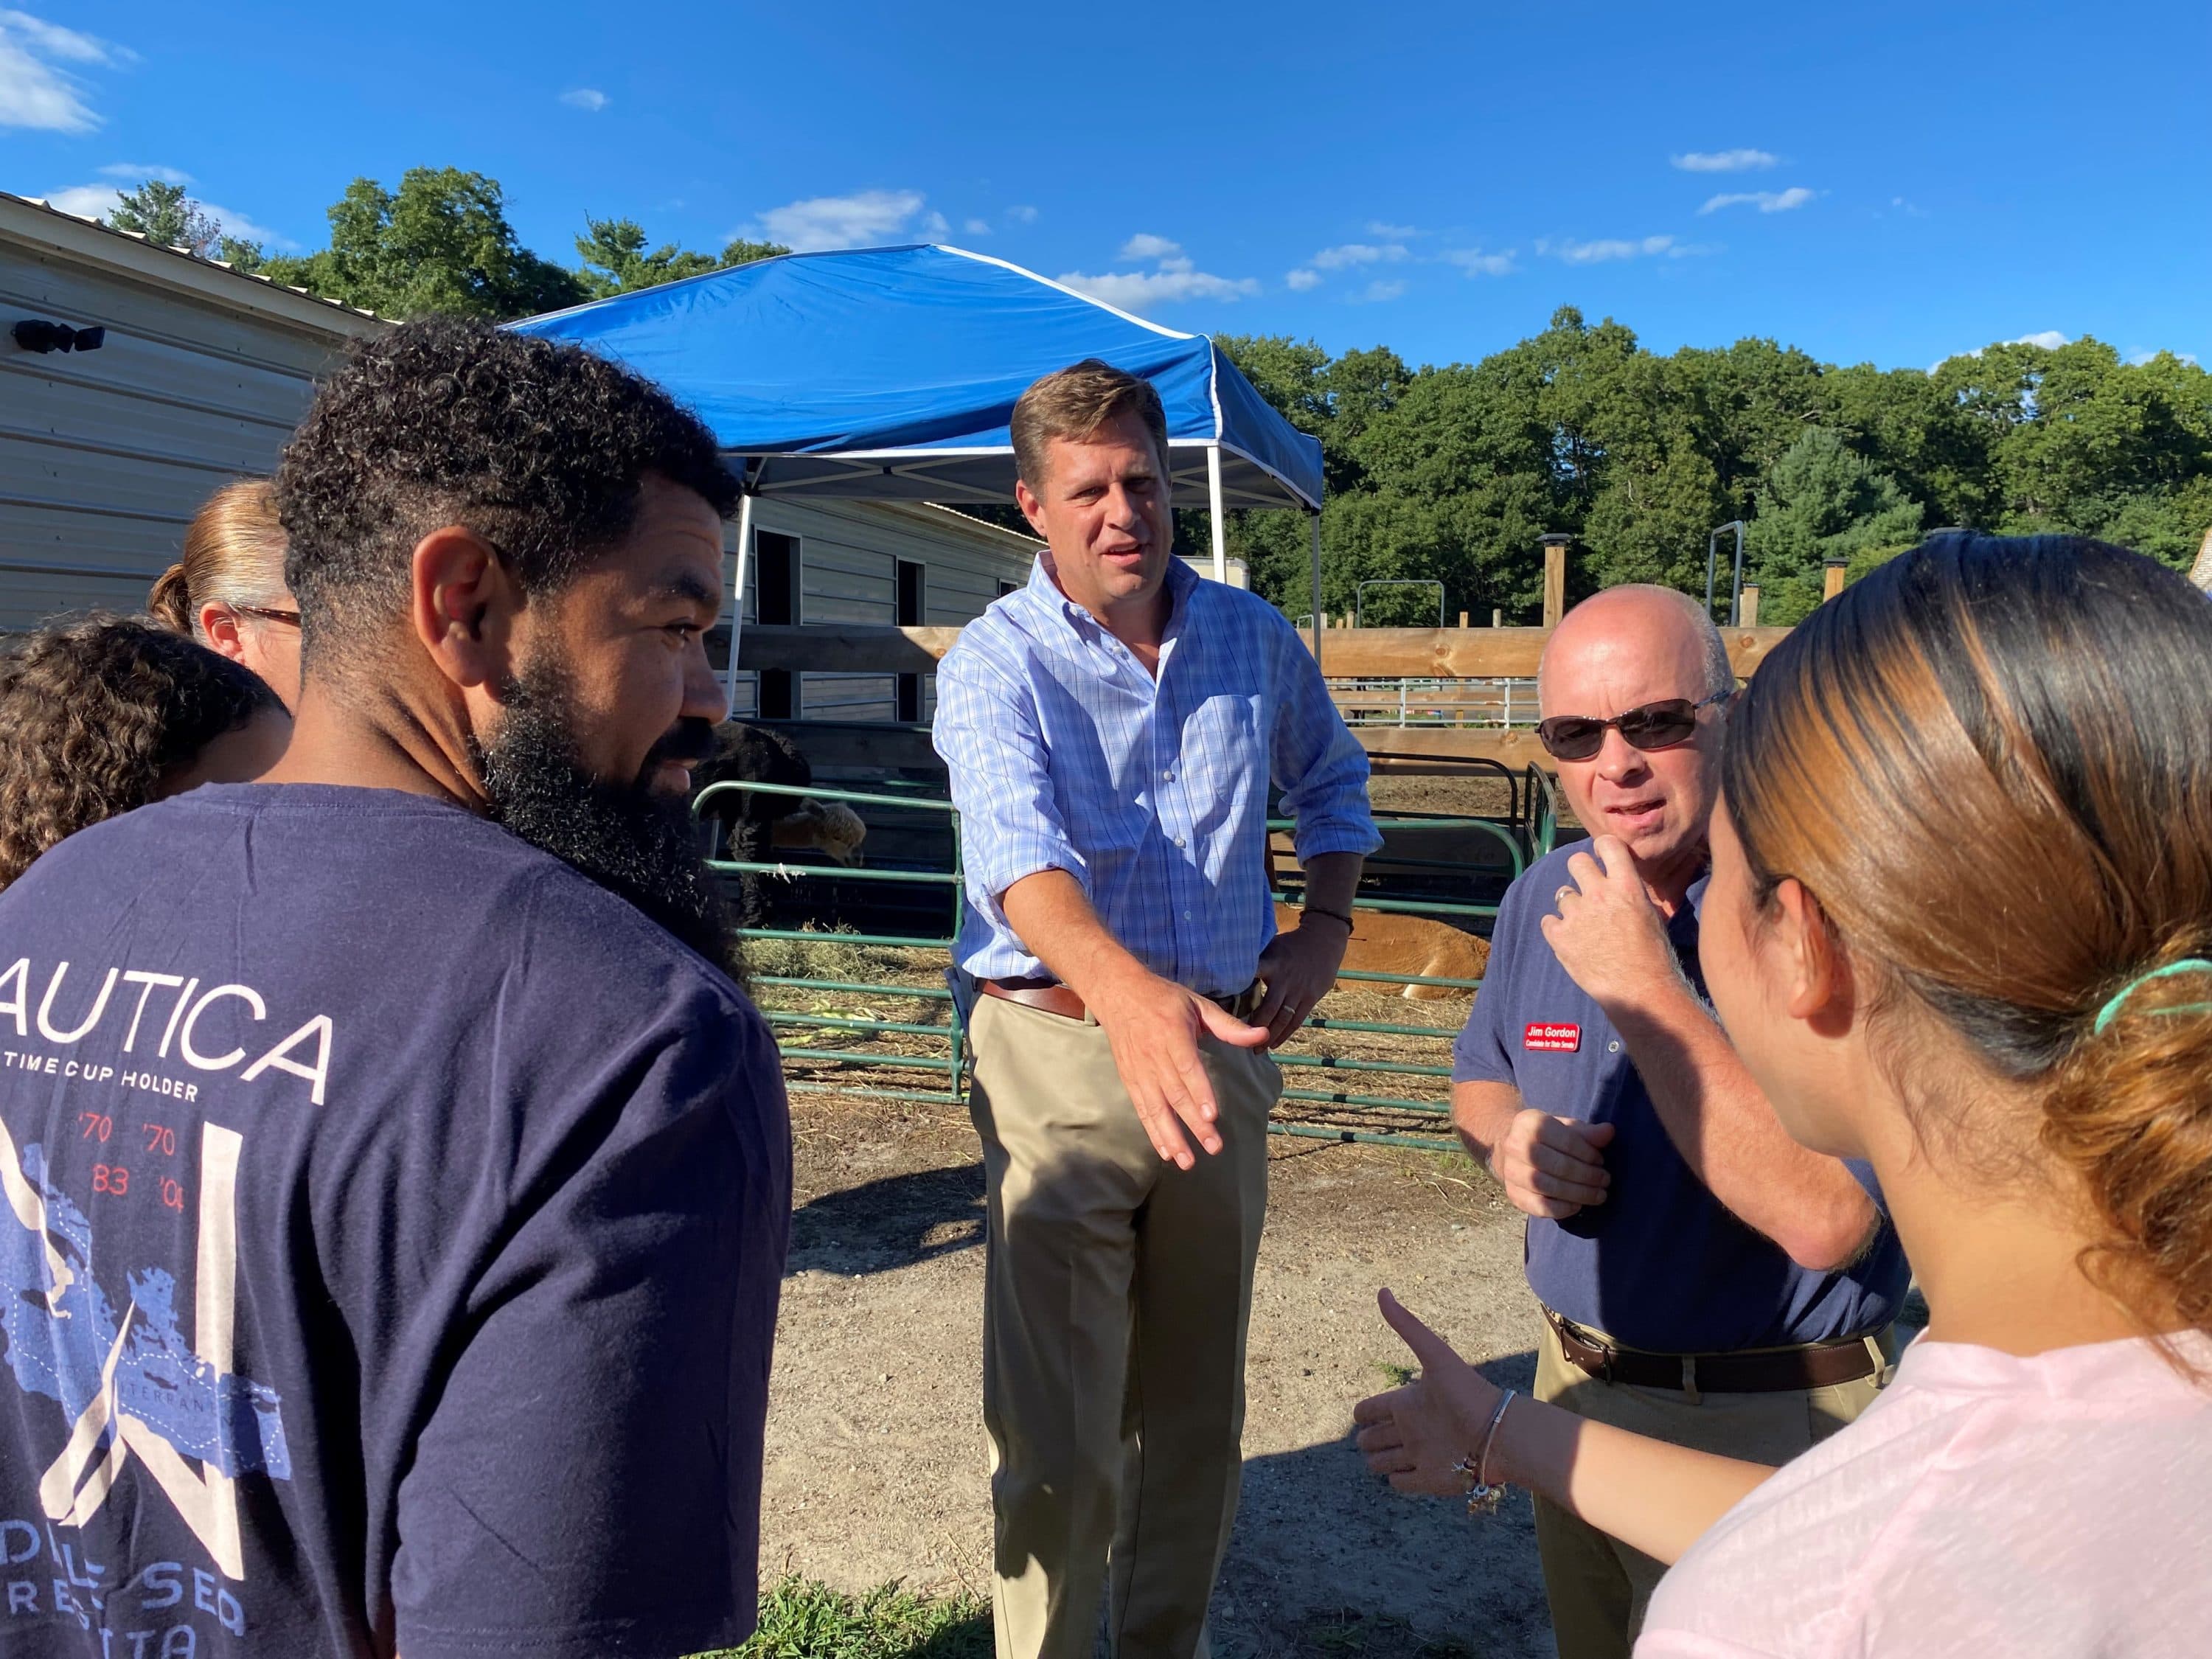 Geoff Diehl, Republican candidate for Governor, campaigns in East Bridgewater. (Anthony Brooks/WBUR)